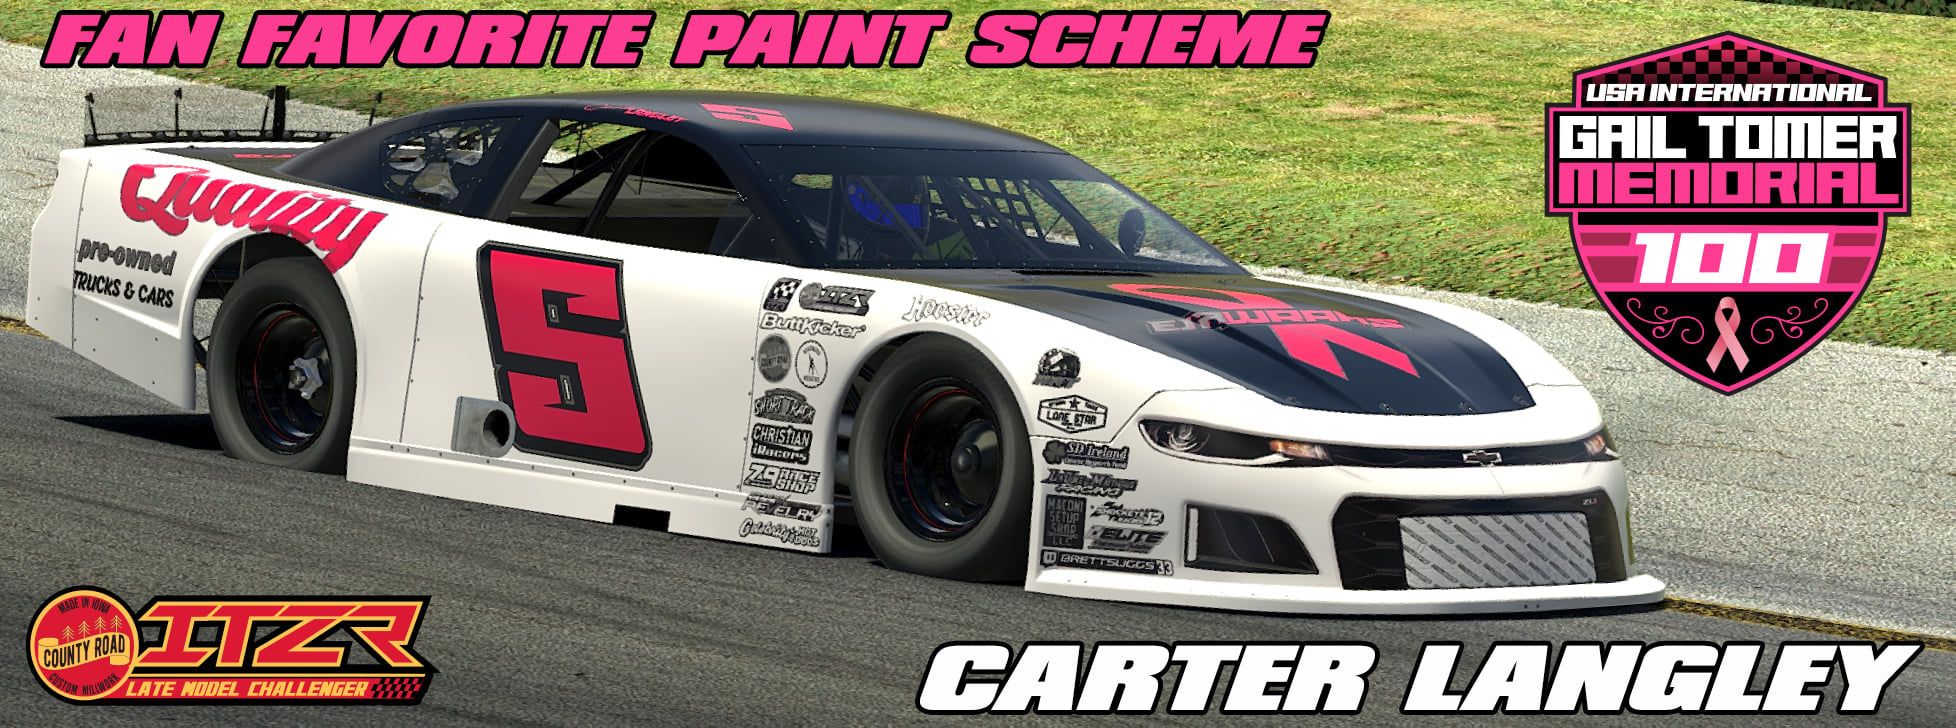 Carter Langley wins the LMCS Pink Out Paint Contest!